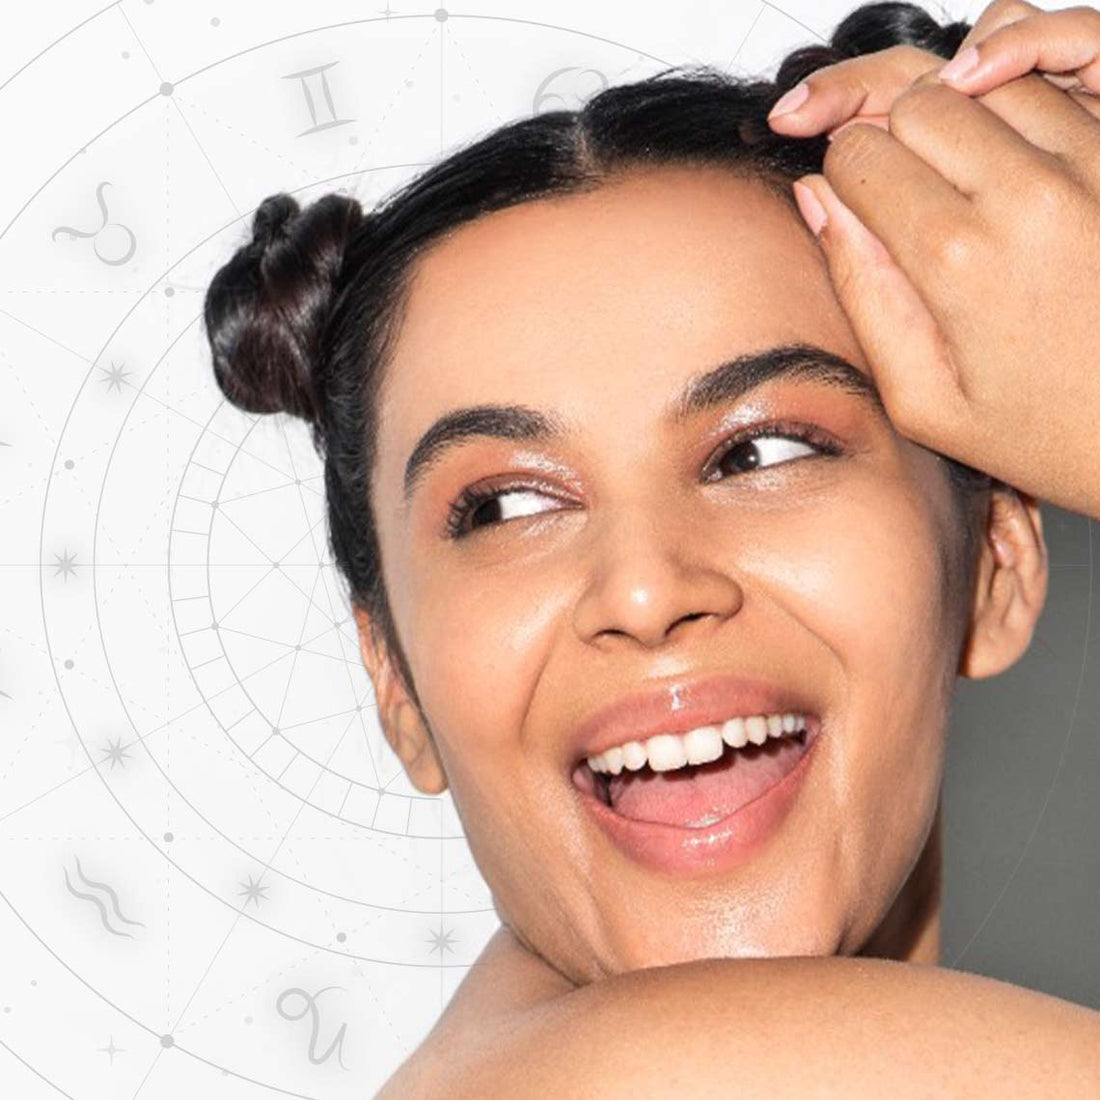 Skincare You’ve Got to Follow Based on Your Zodiac Sign